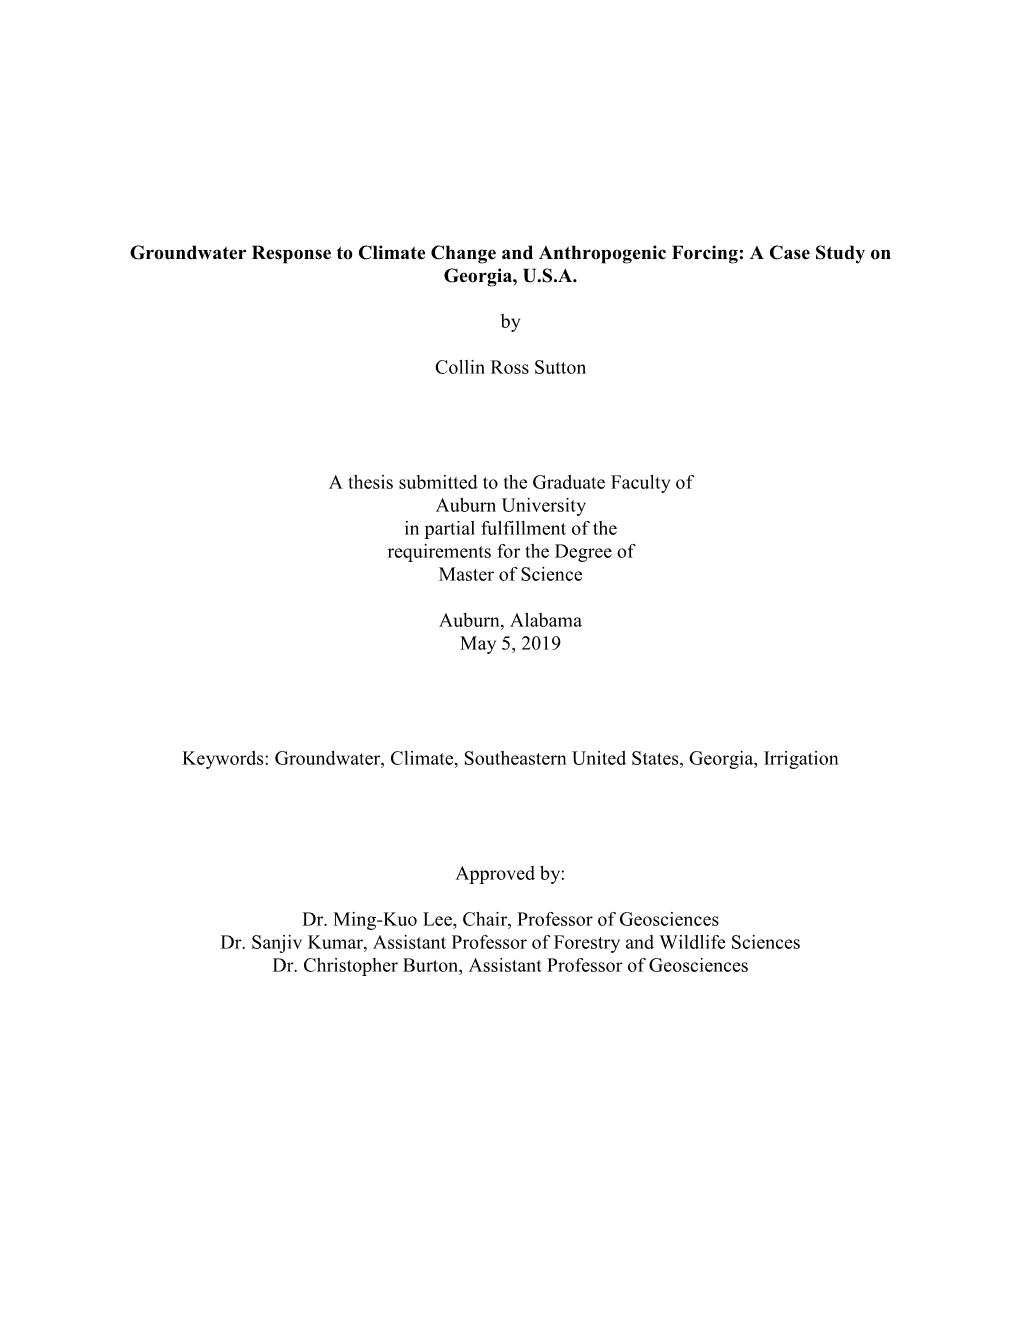 Groundwater Response to Climate Change and Anthropogenic Forcing: a Case Study on Georgia, U.S.A